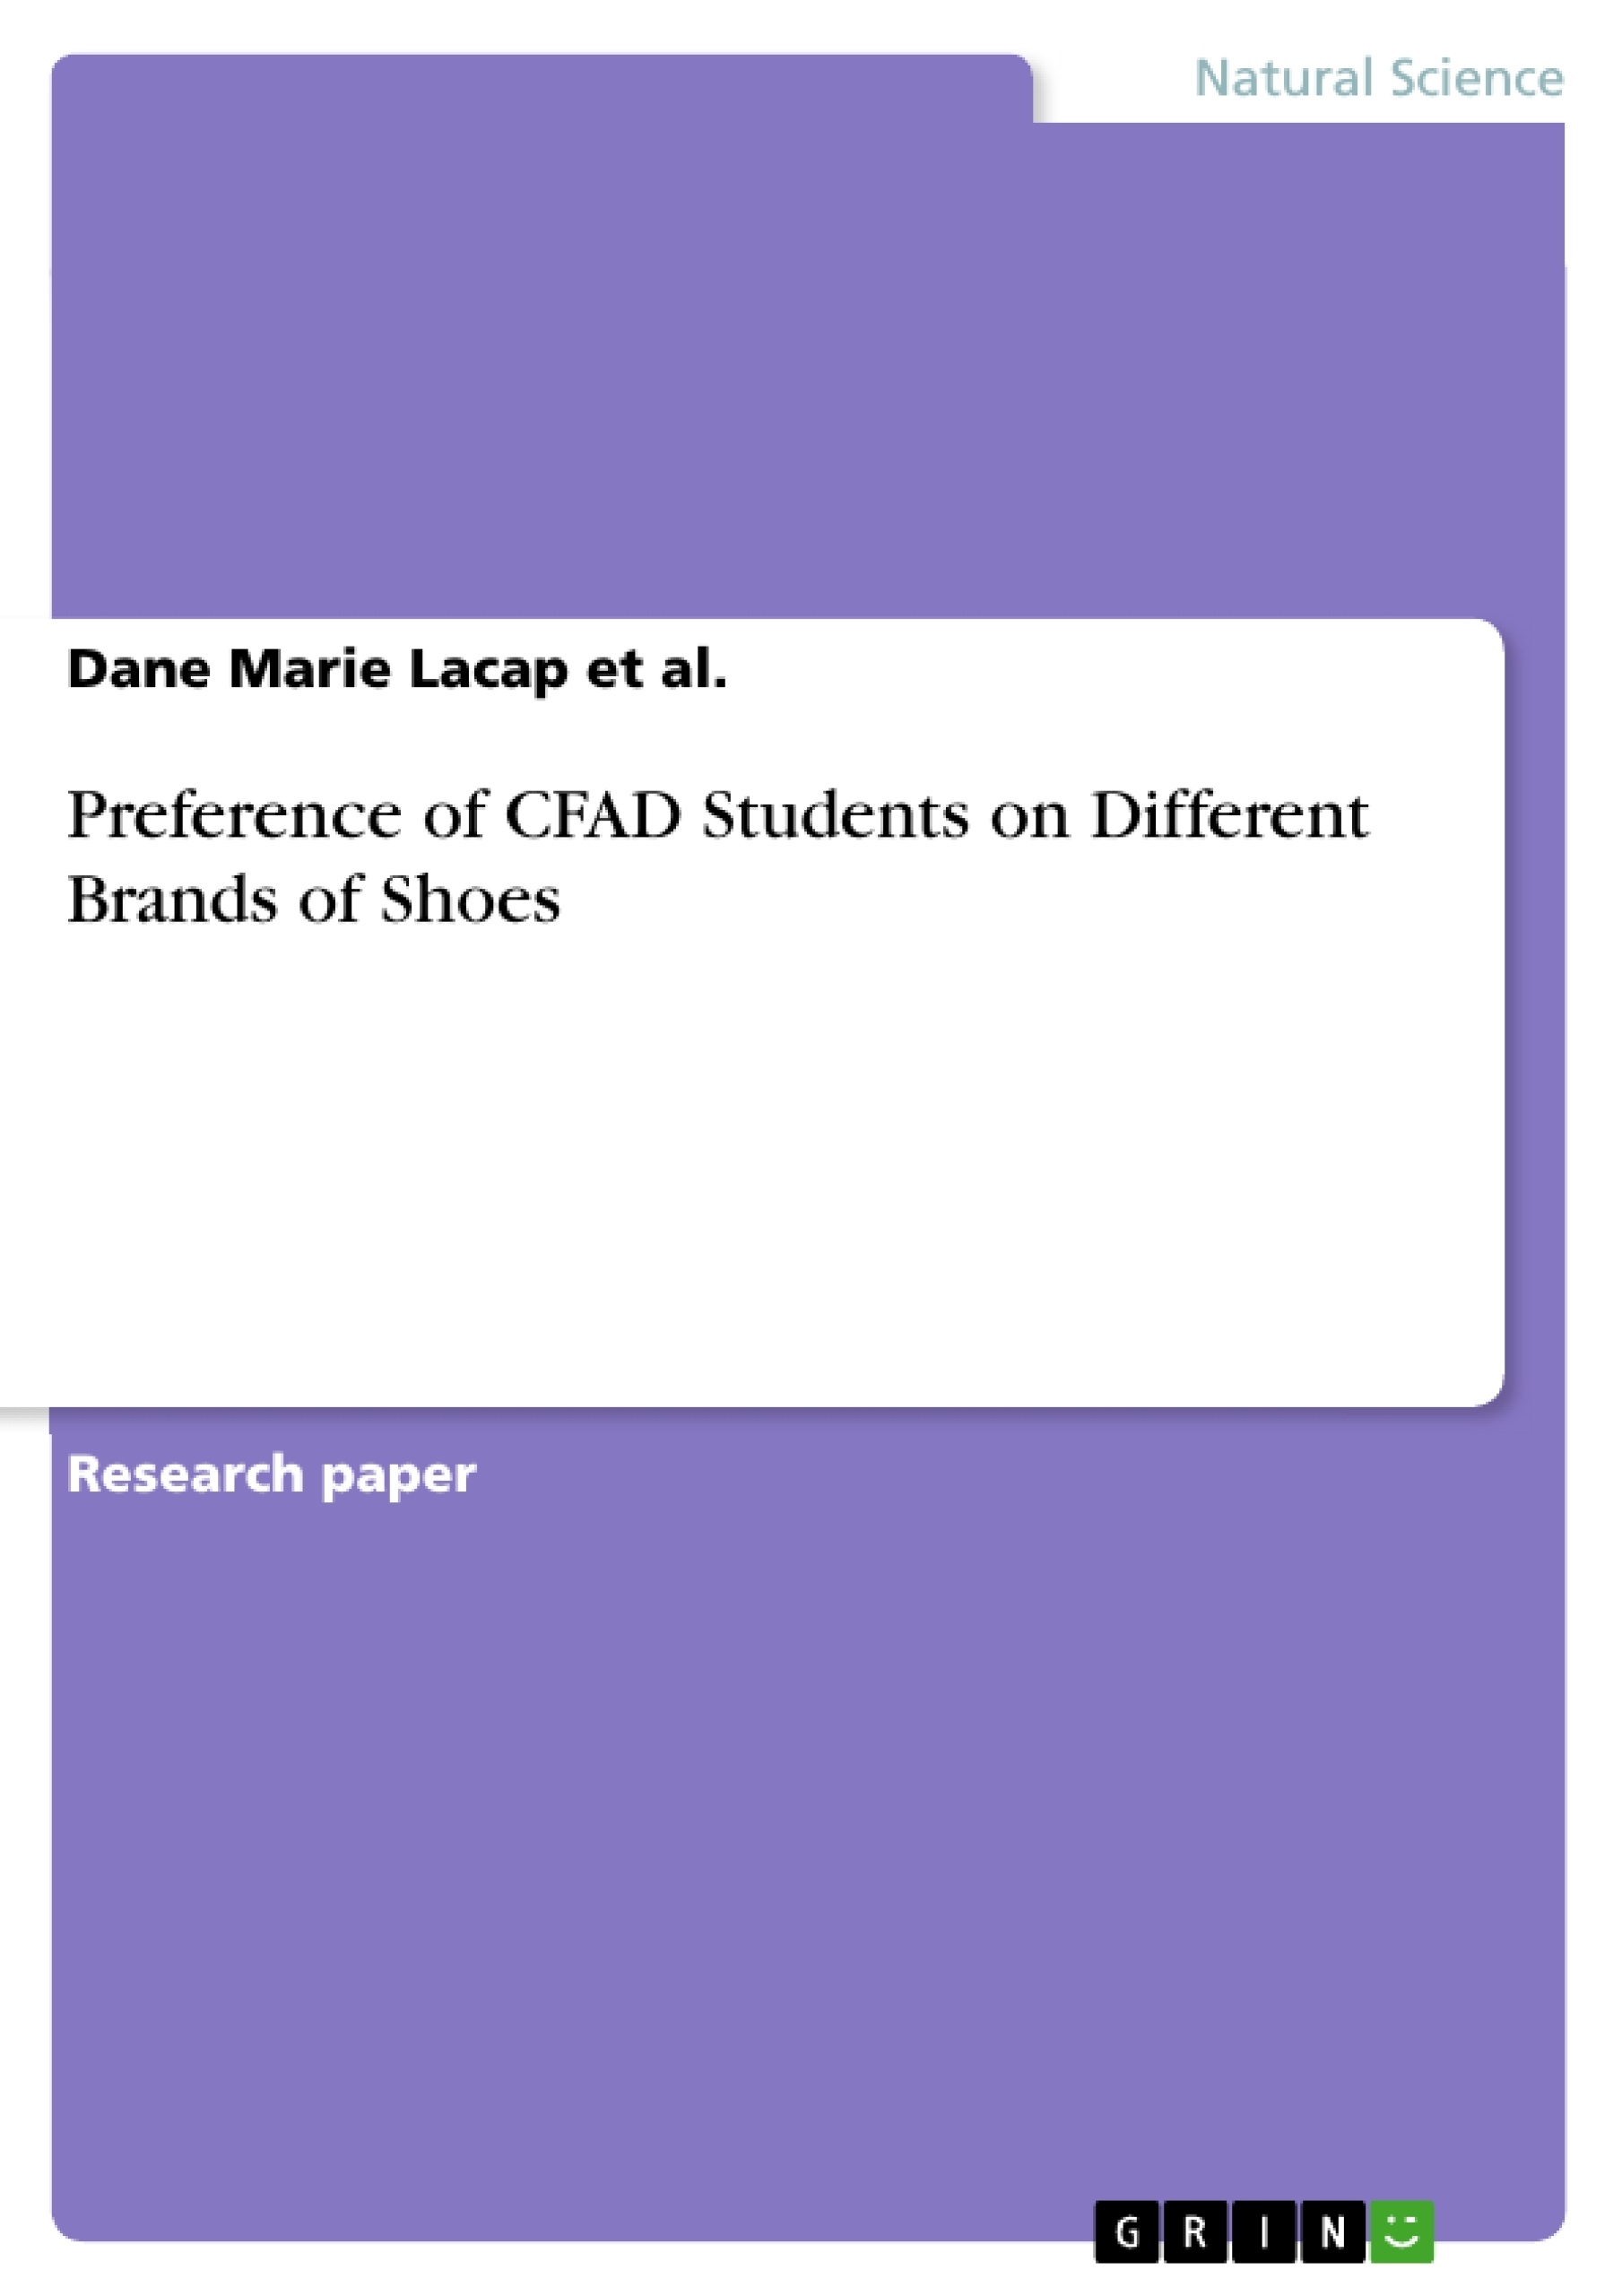 Titre: Preference of CFAD Students on Different Brands of Shoes